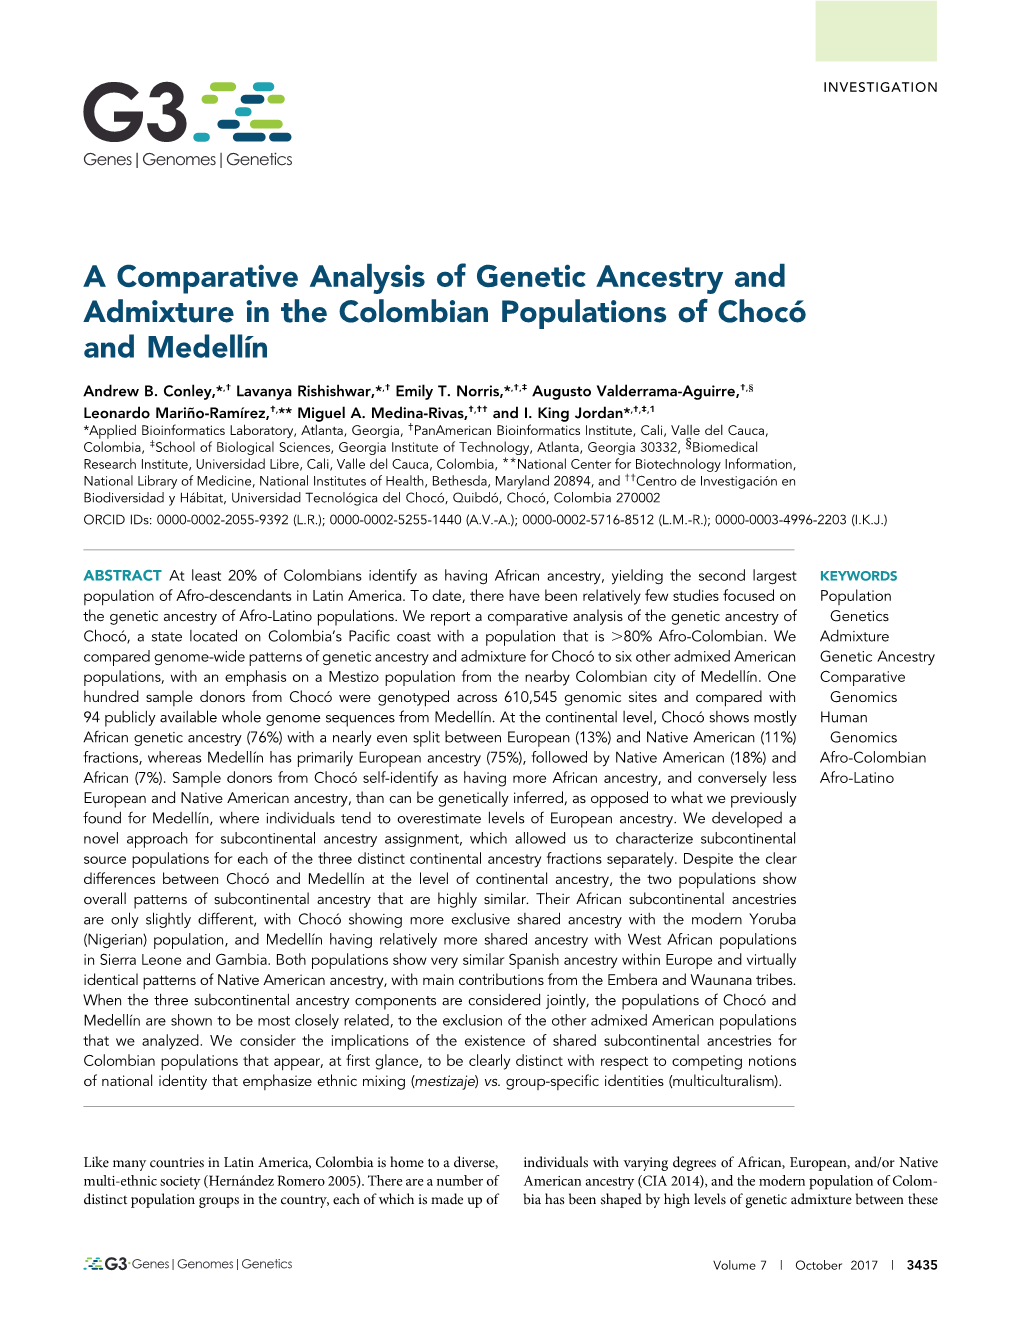 A Comparative Analysis of Genetic Ancestry and Admixture in the Colombian Populations of Chocó and Medellín